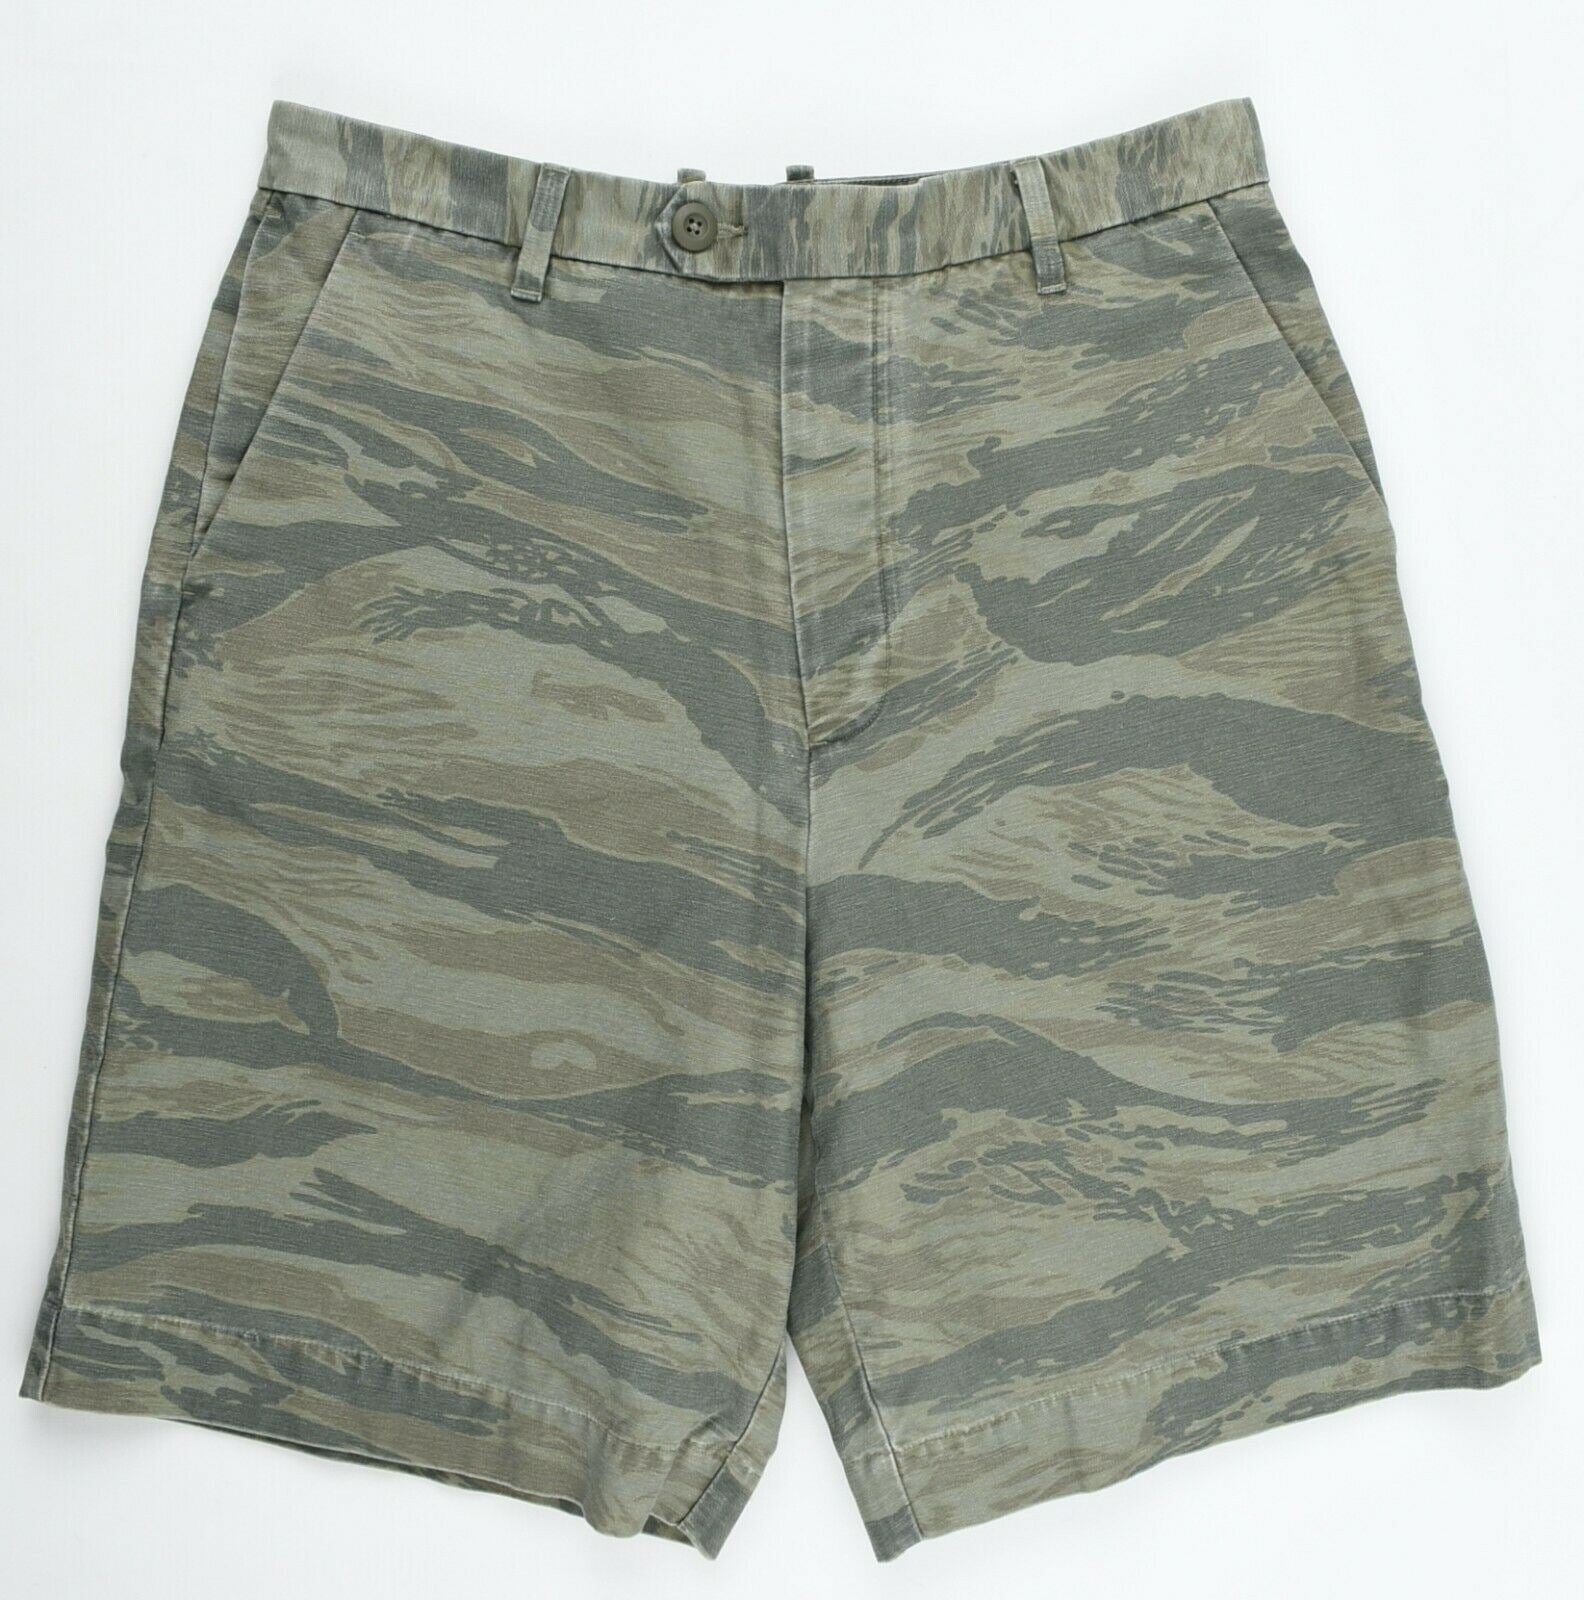 ALLSAINTS Men's STORM Relaxed Fit Green Camouflage Shorts, size W28